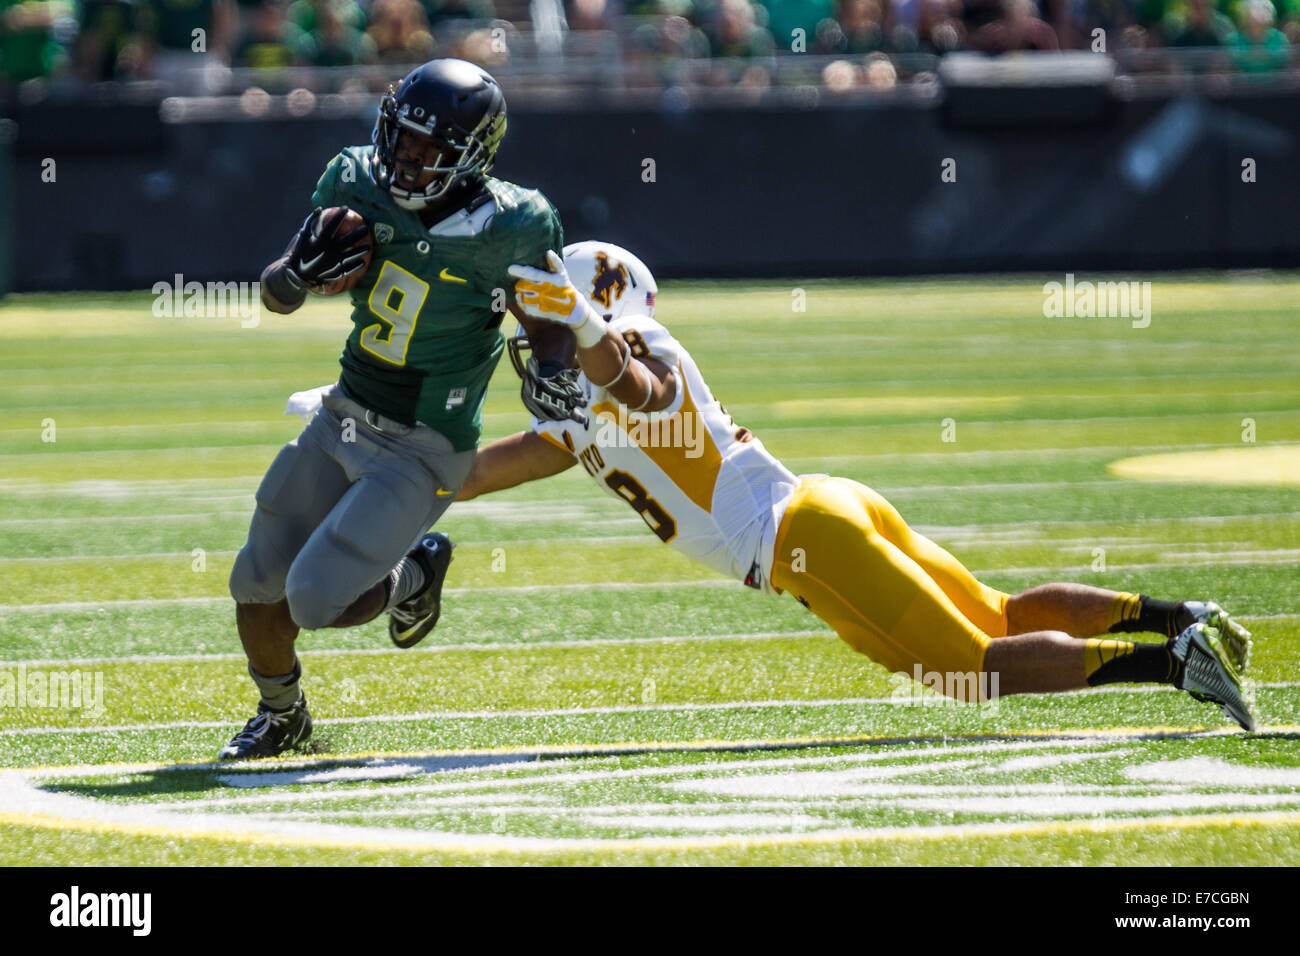 Sept. 13, 2014 - BYRON MARSHALL (9) runs his way into the endzone for a touchdown. The University of Oregon plays Wyoming at Autzen Stadium on September 13, 2014. © David Blair/ZUMA Wire/Alamy Live News Stock Photo